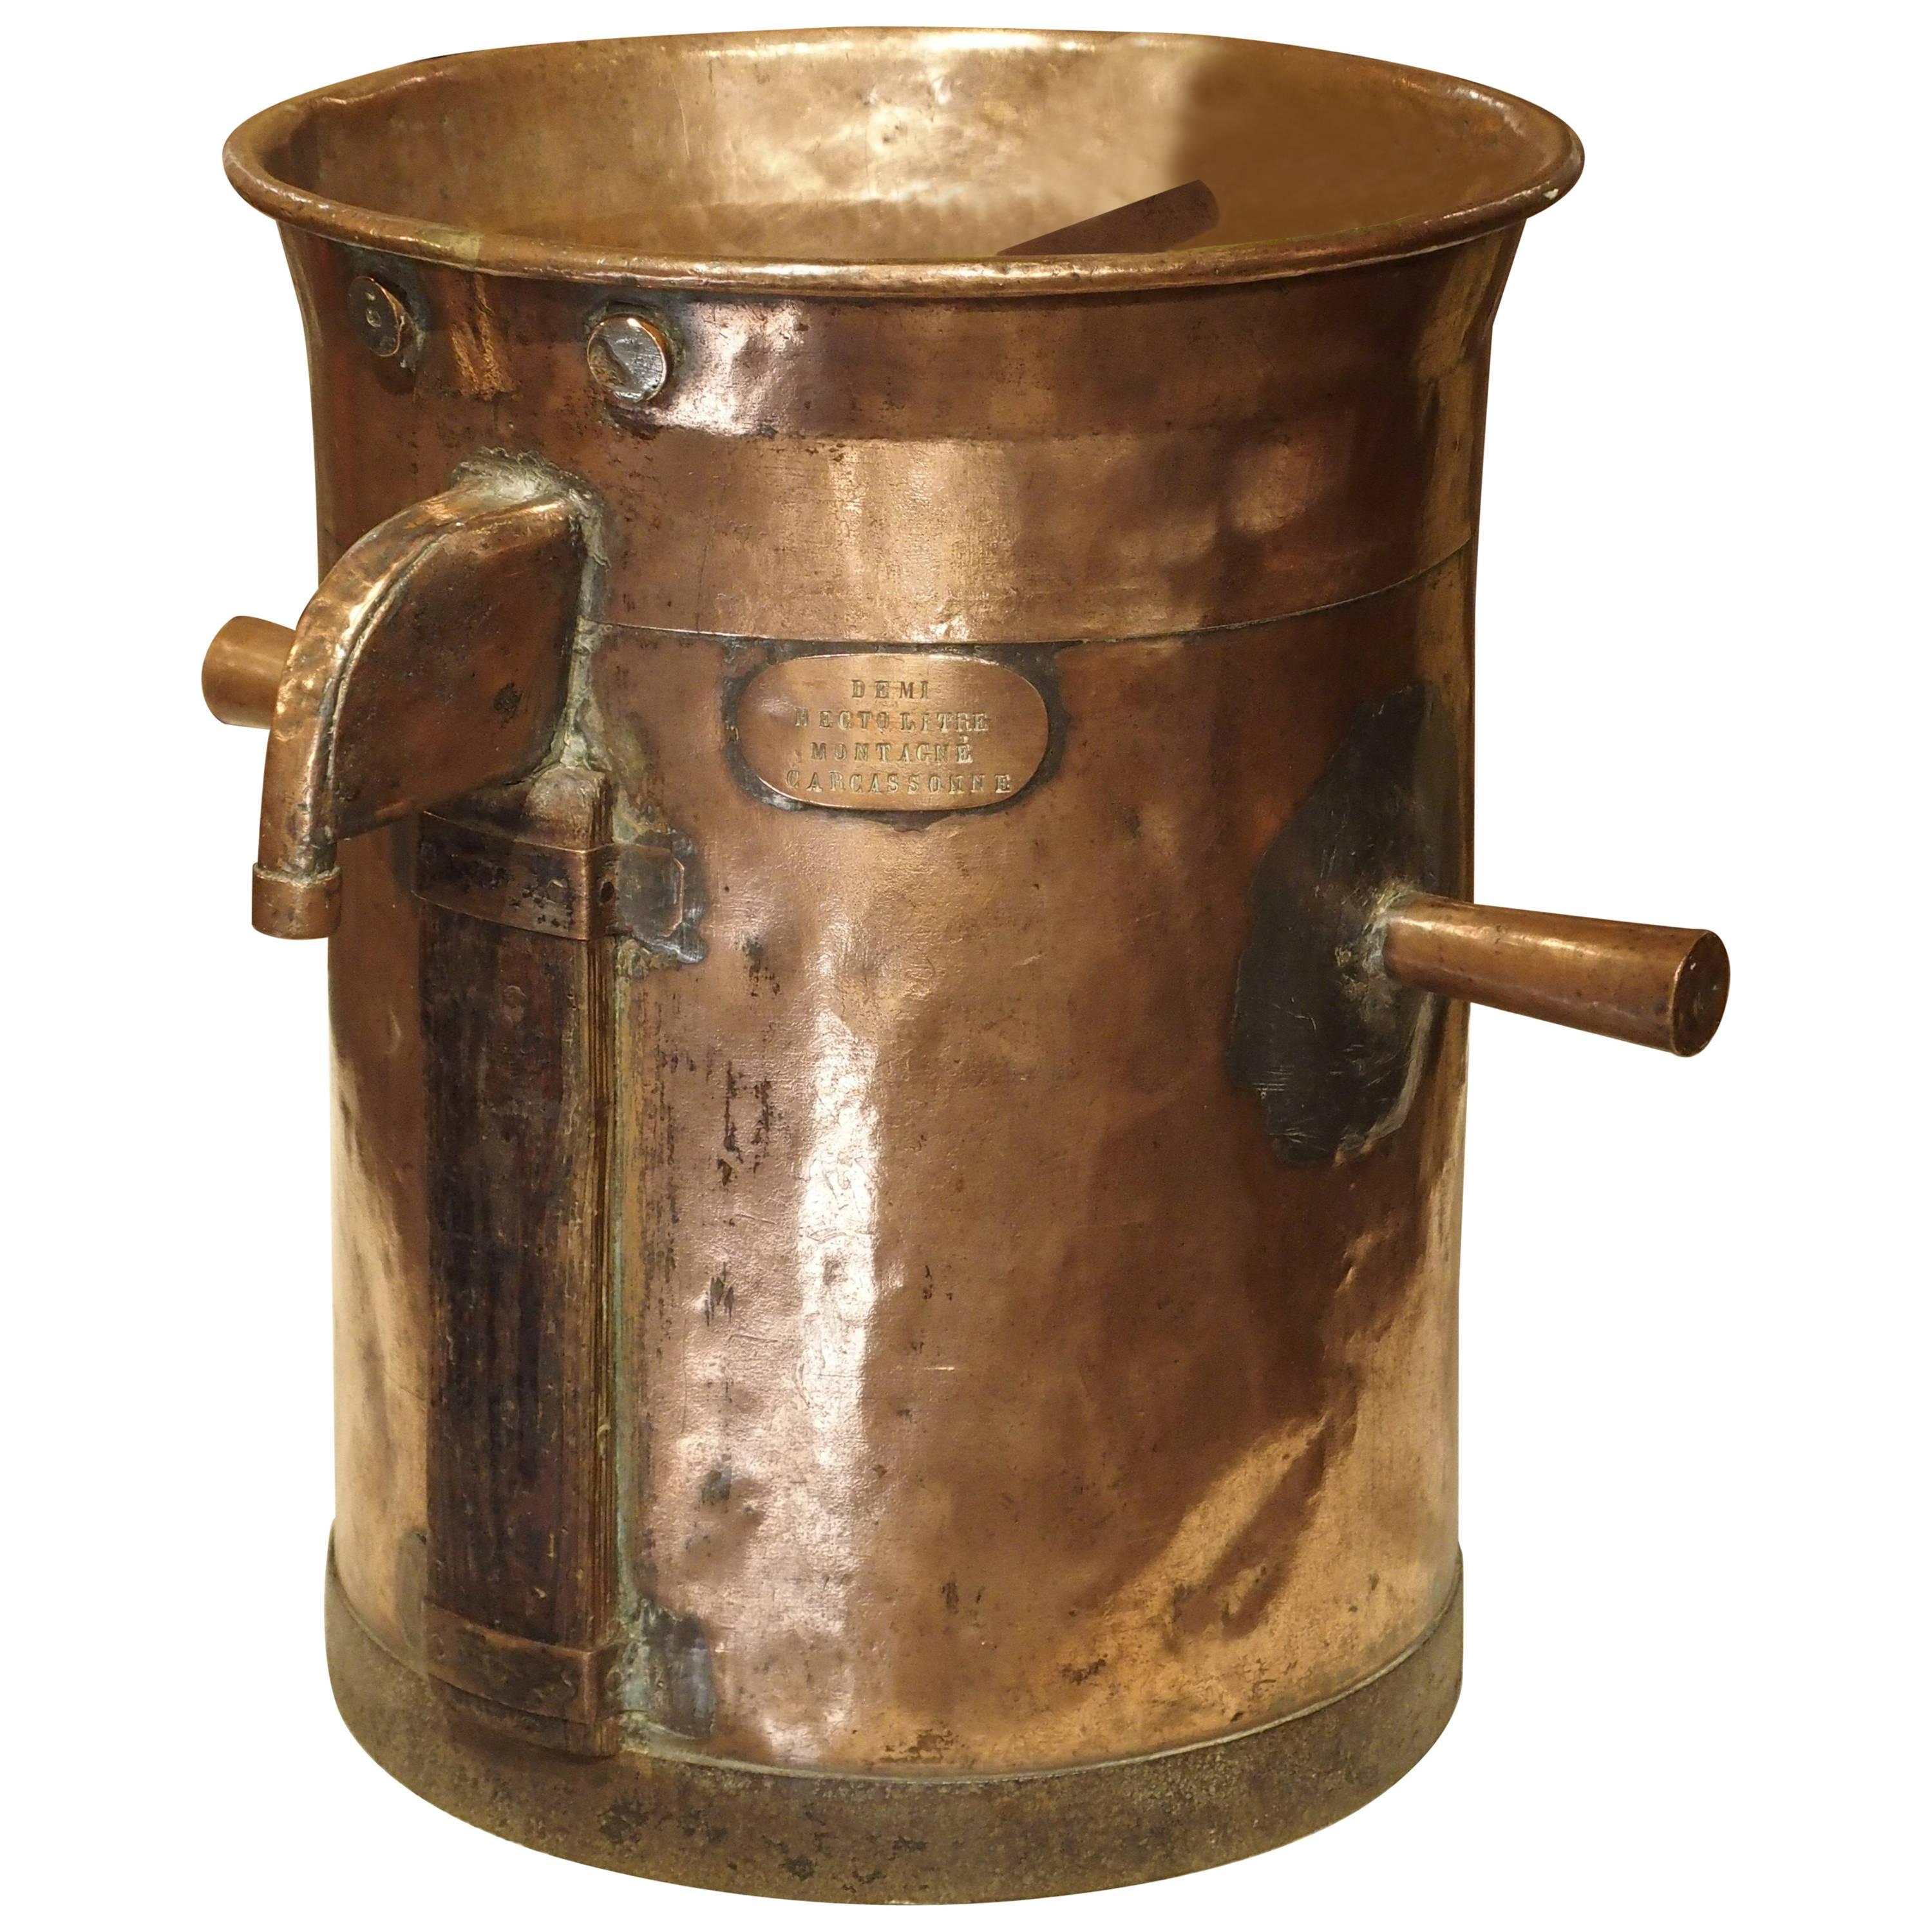 Antique Copper 50 Liter Wine Vessel from Carcassonne France, circa 1850